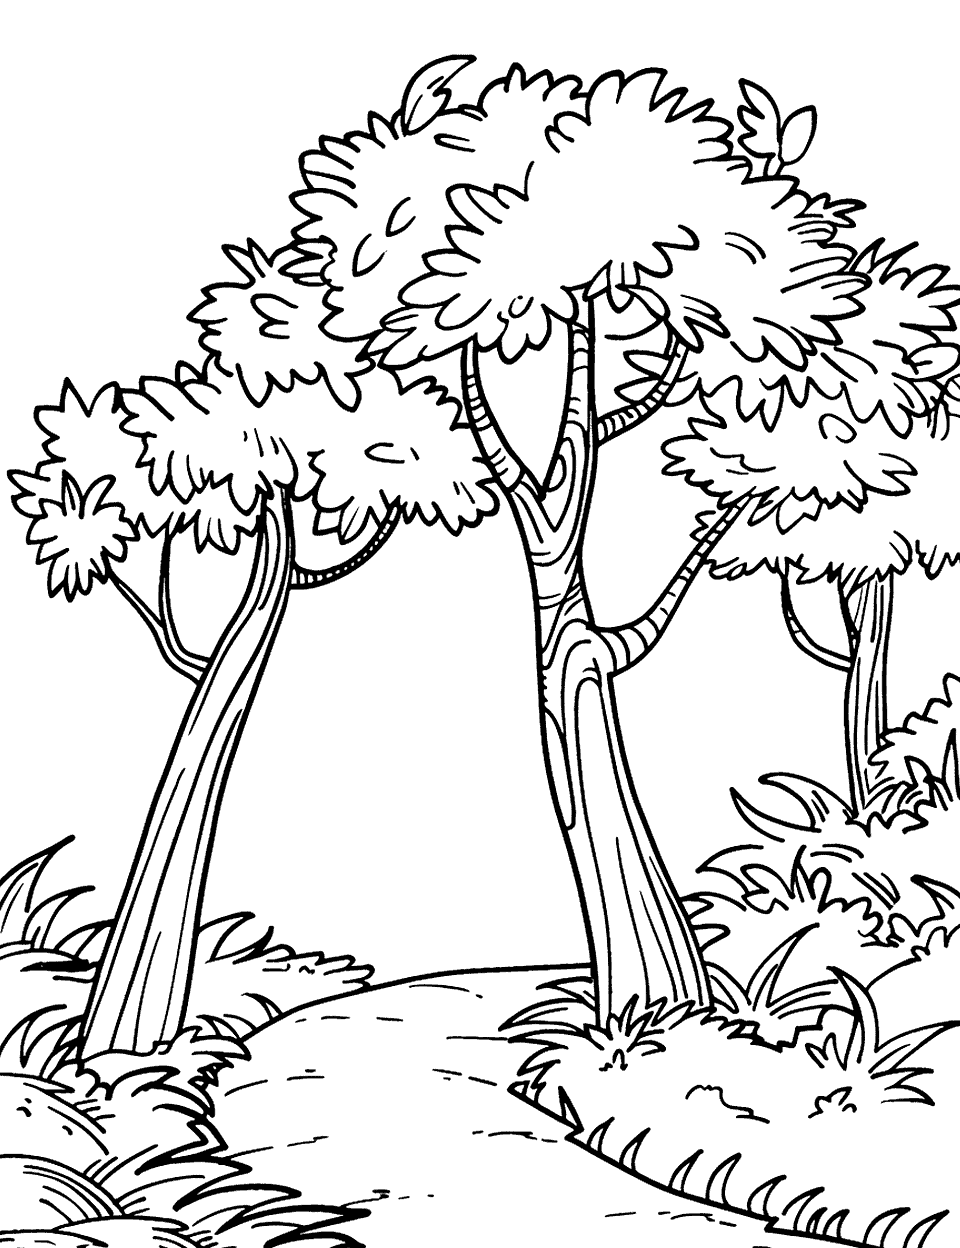 Forest Path Coloring Page - A narrow path winding through a forest of trees.